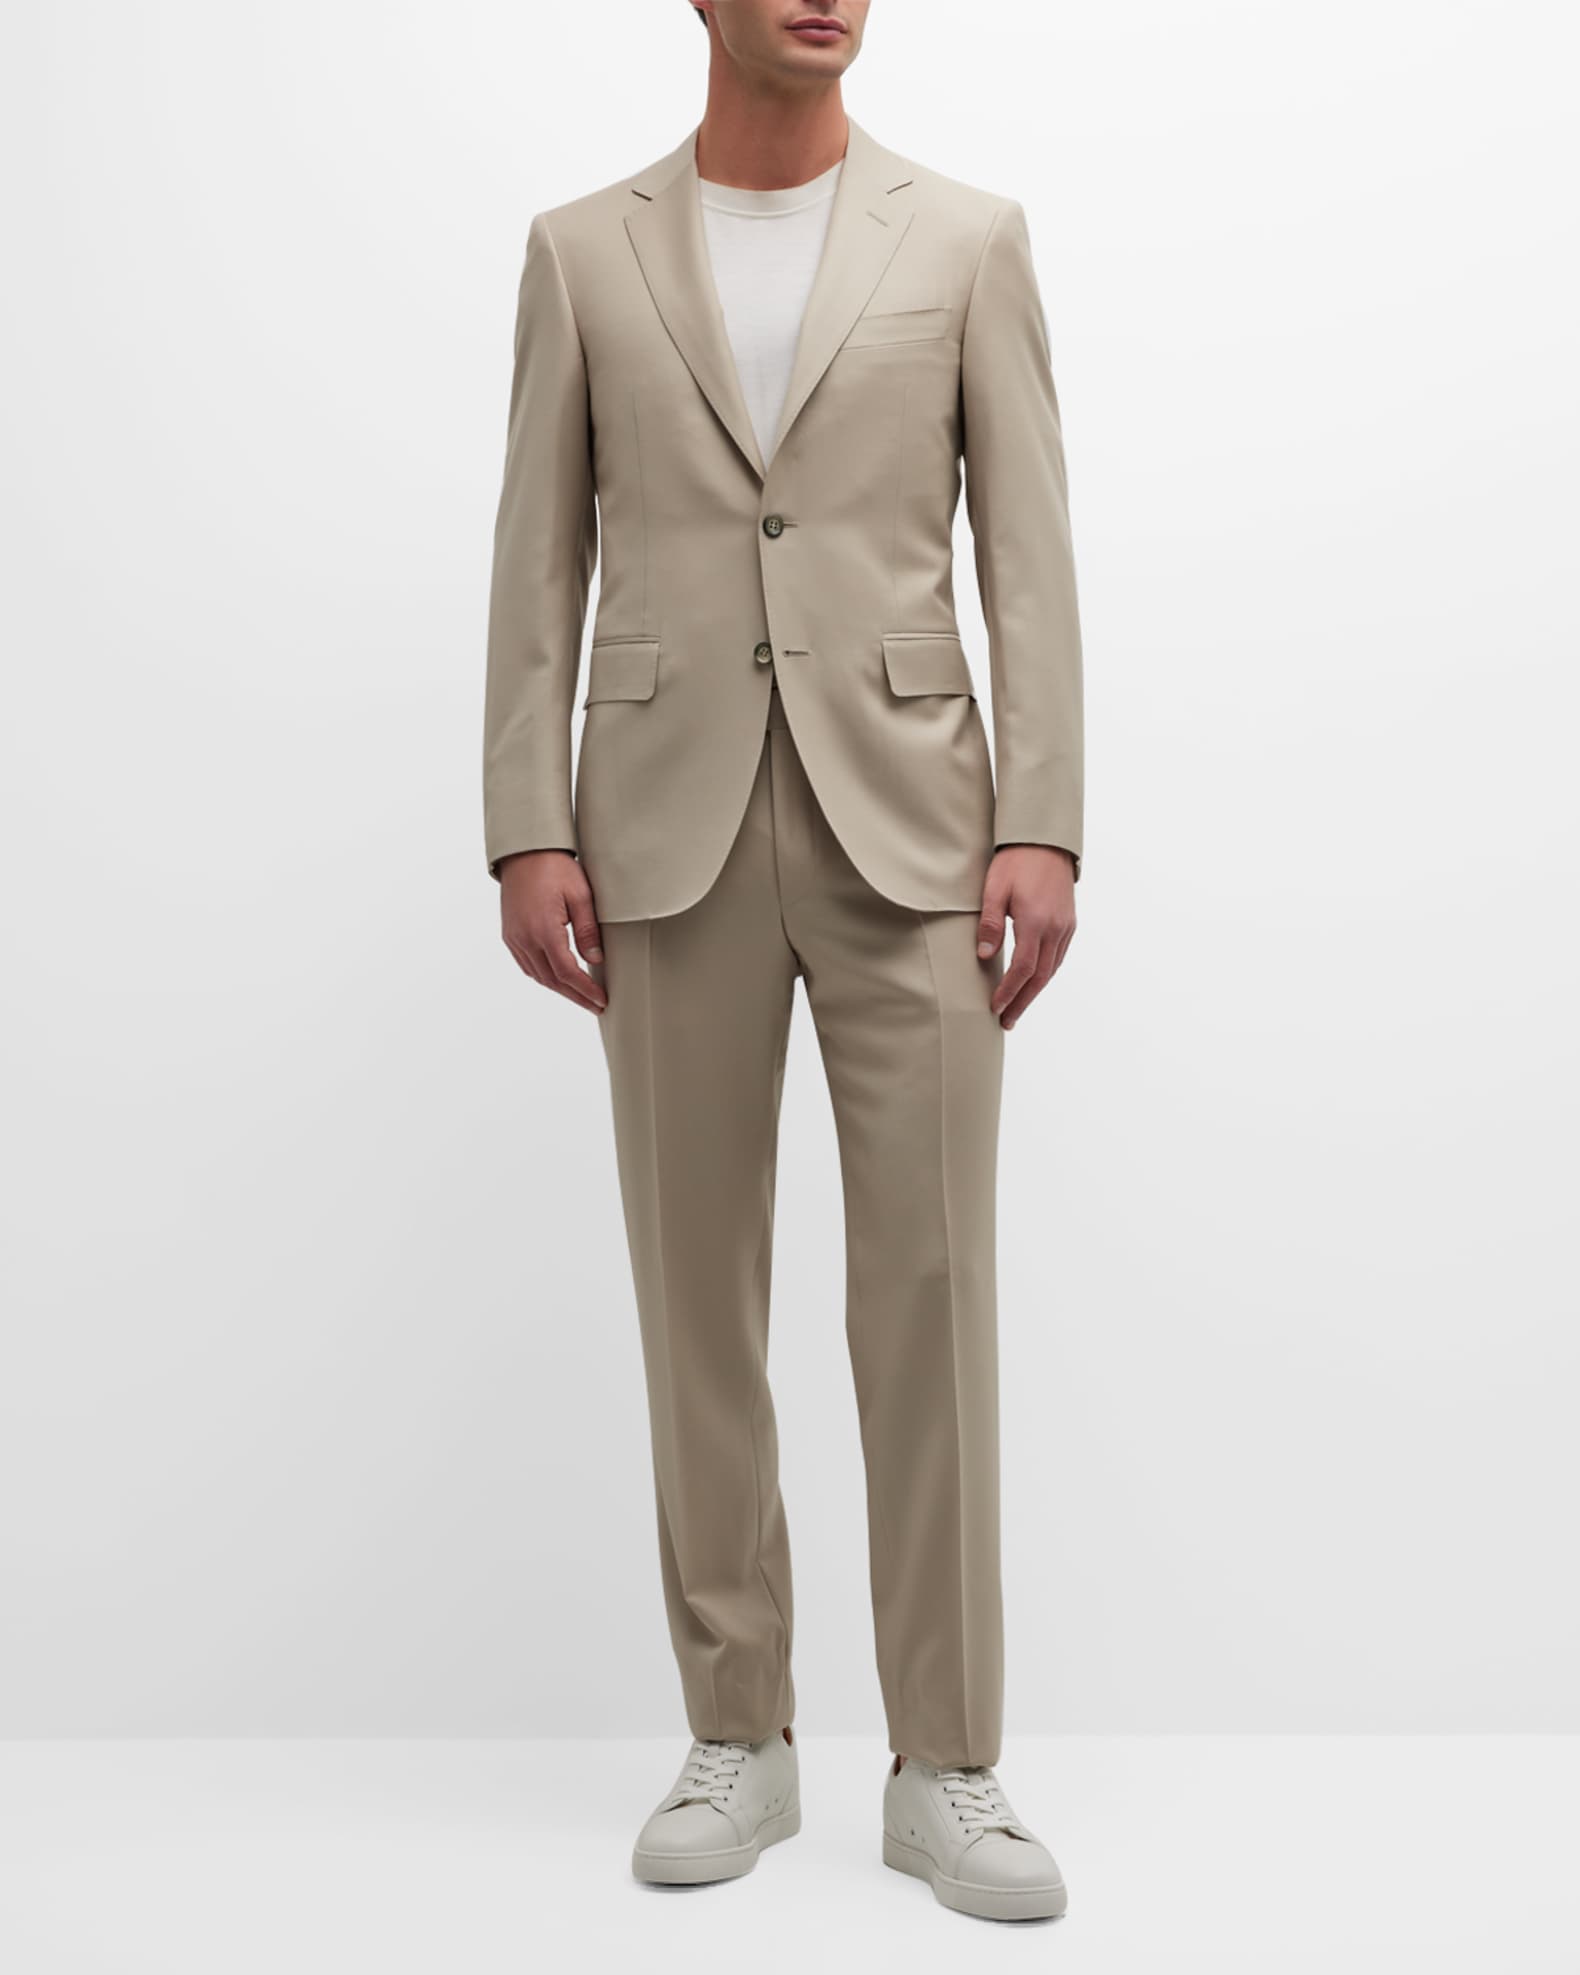 Canali Men's Solid Wool Twill Suit | Neiman Marcus